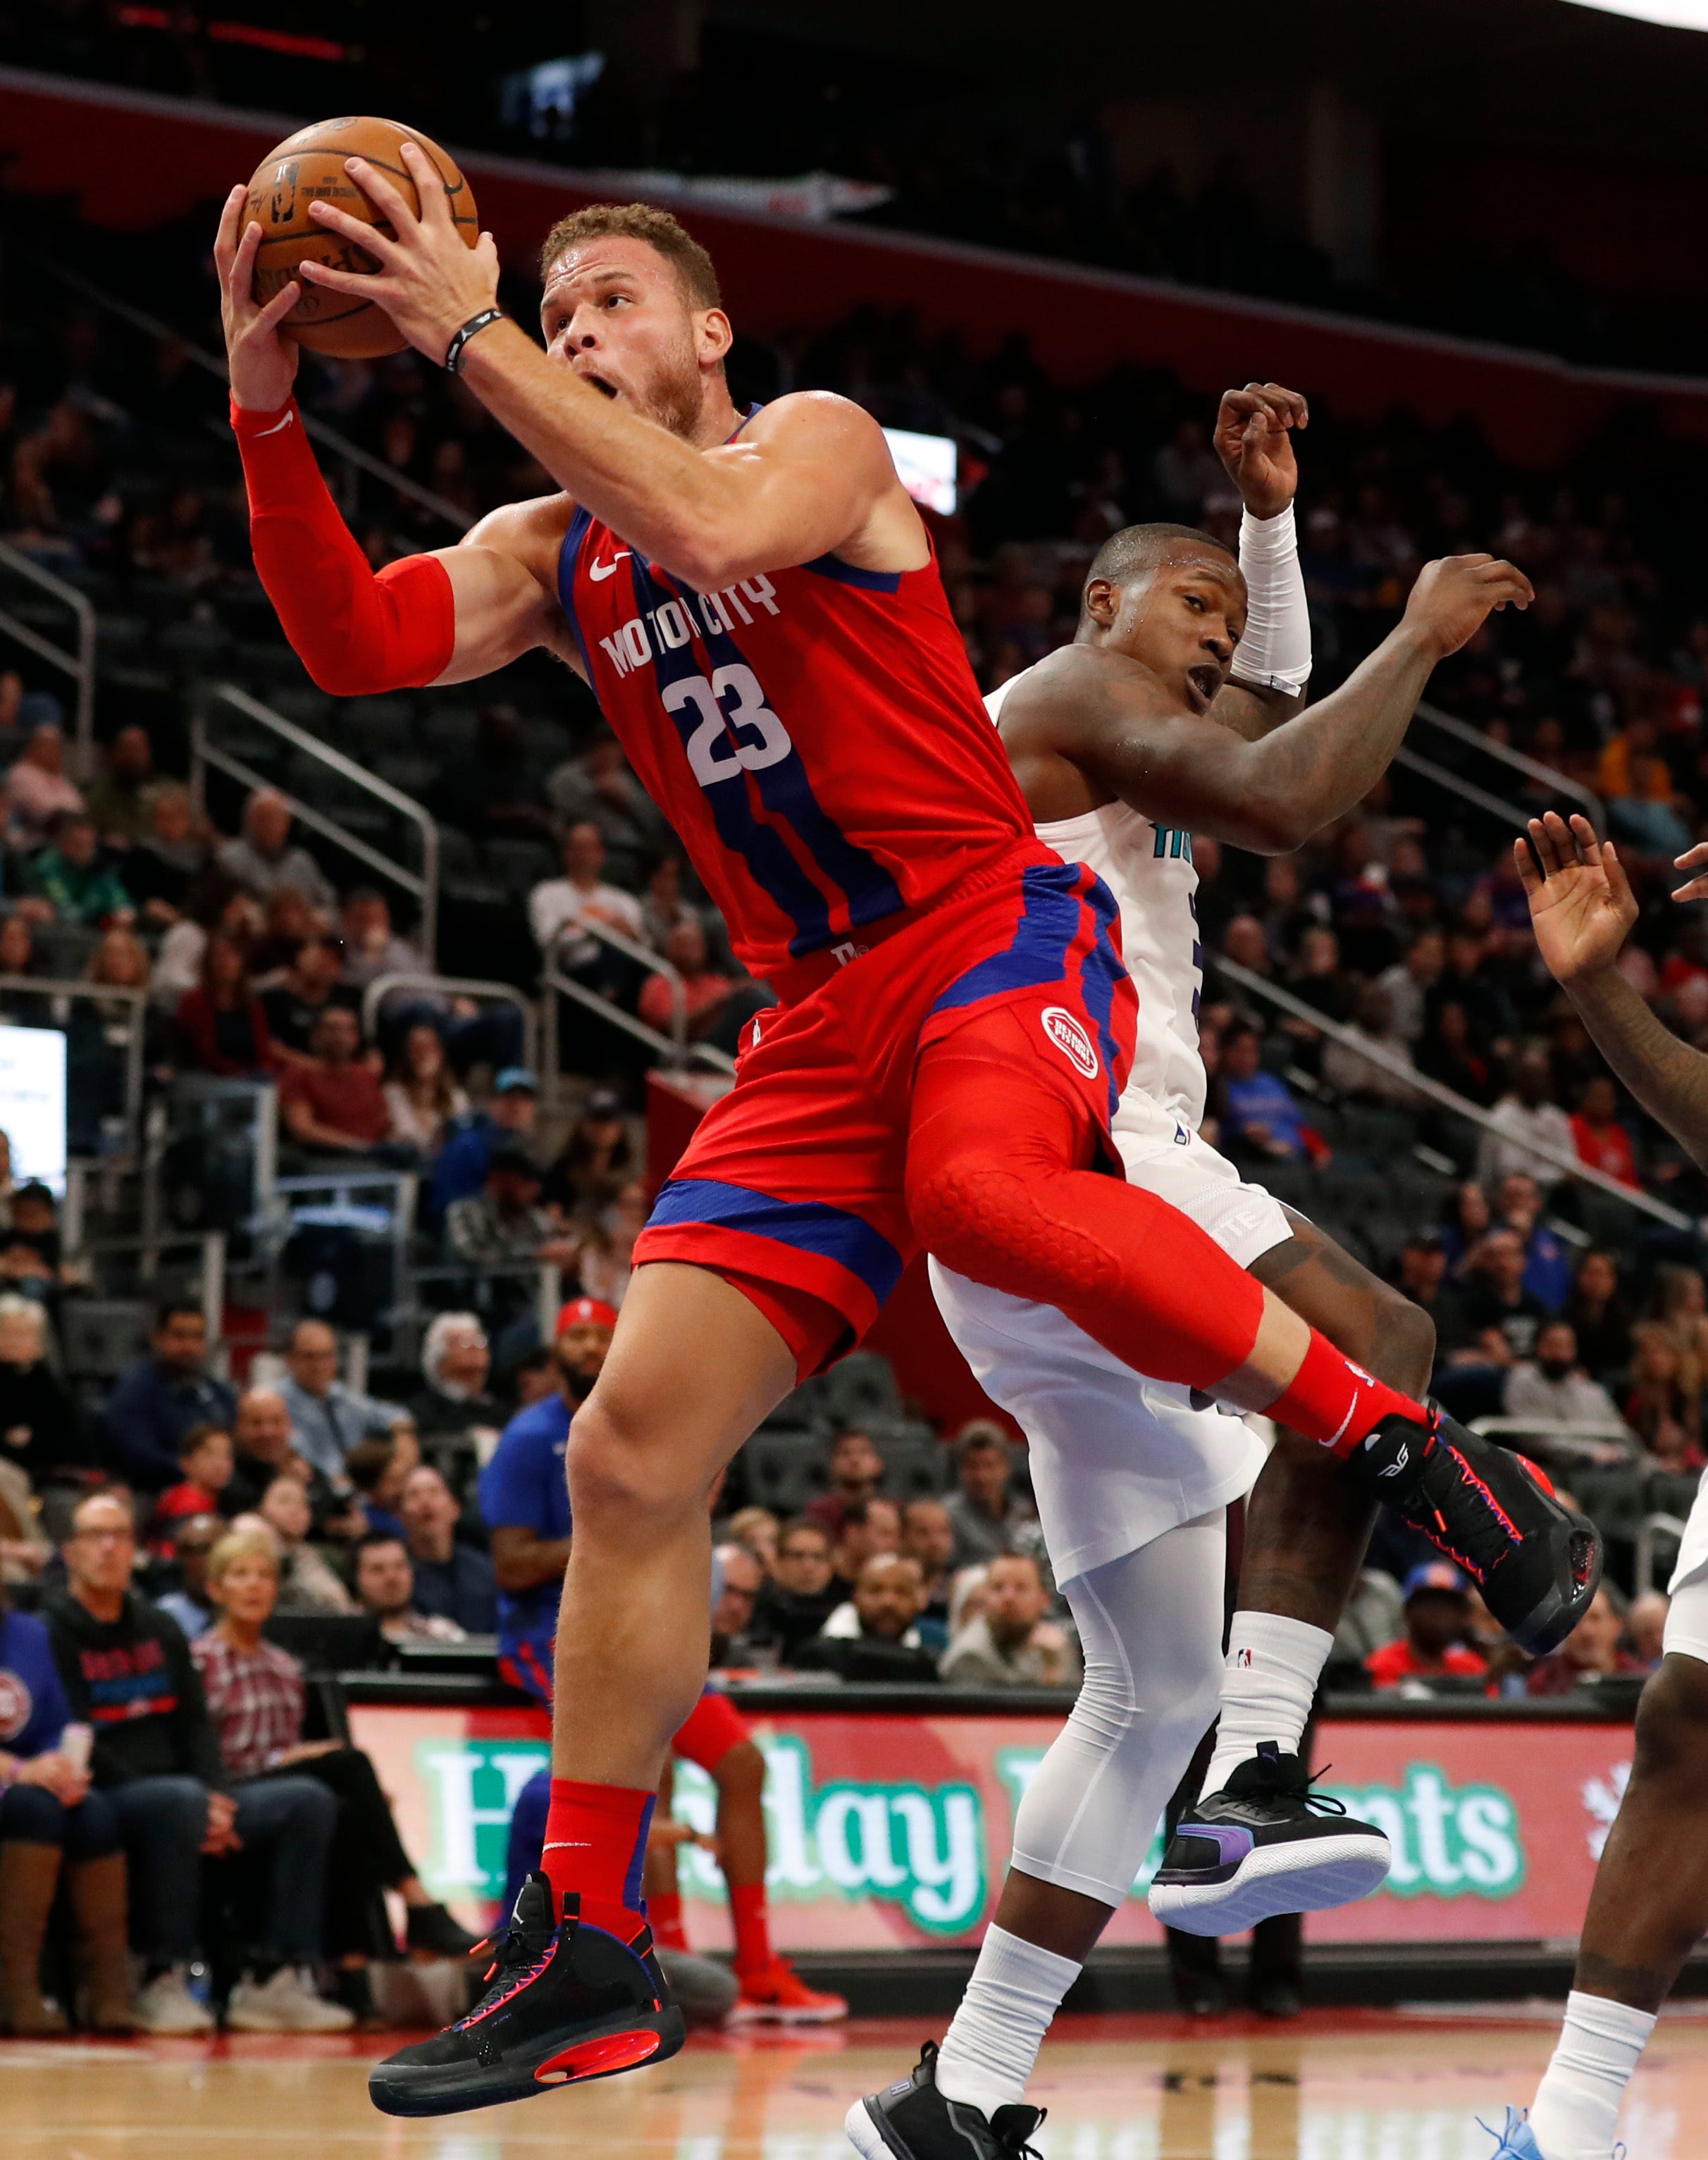 Pistons forward Blake Griffin reaches for a pass during the first half.